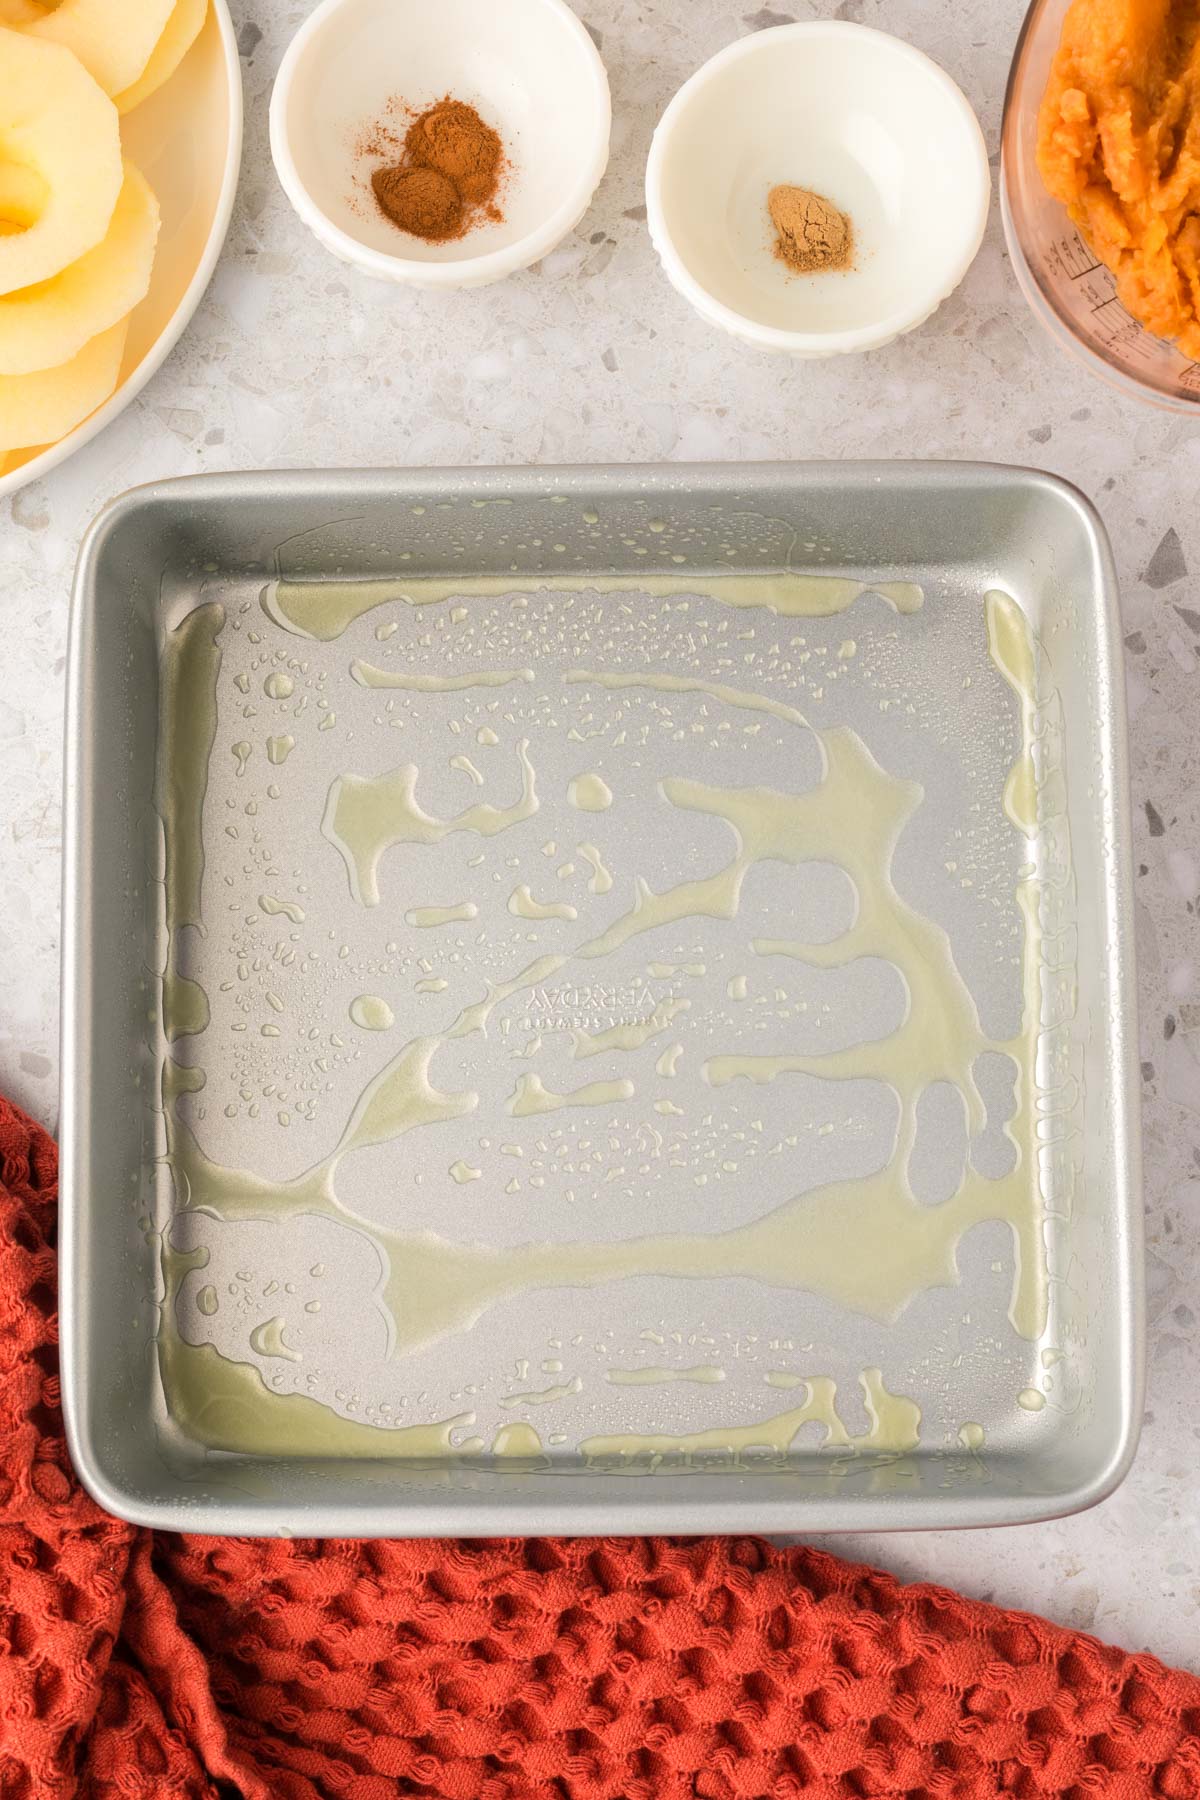 Preparing the baking dish with cooking spray